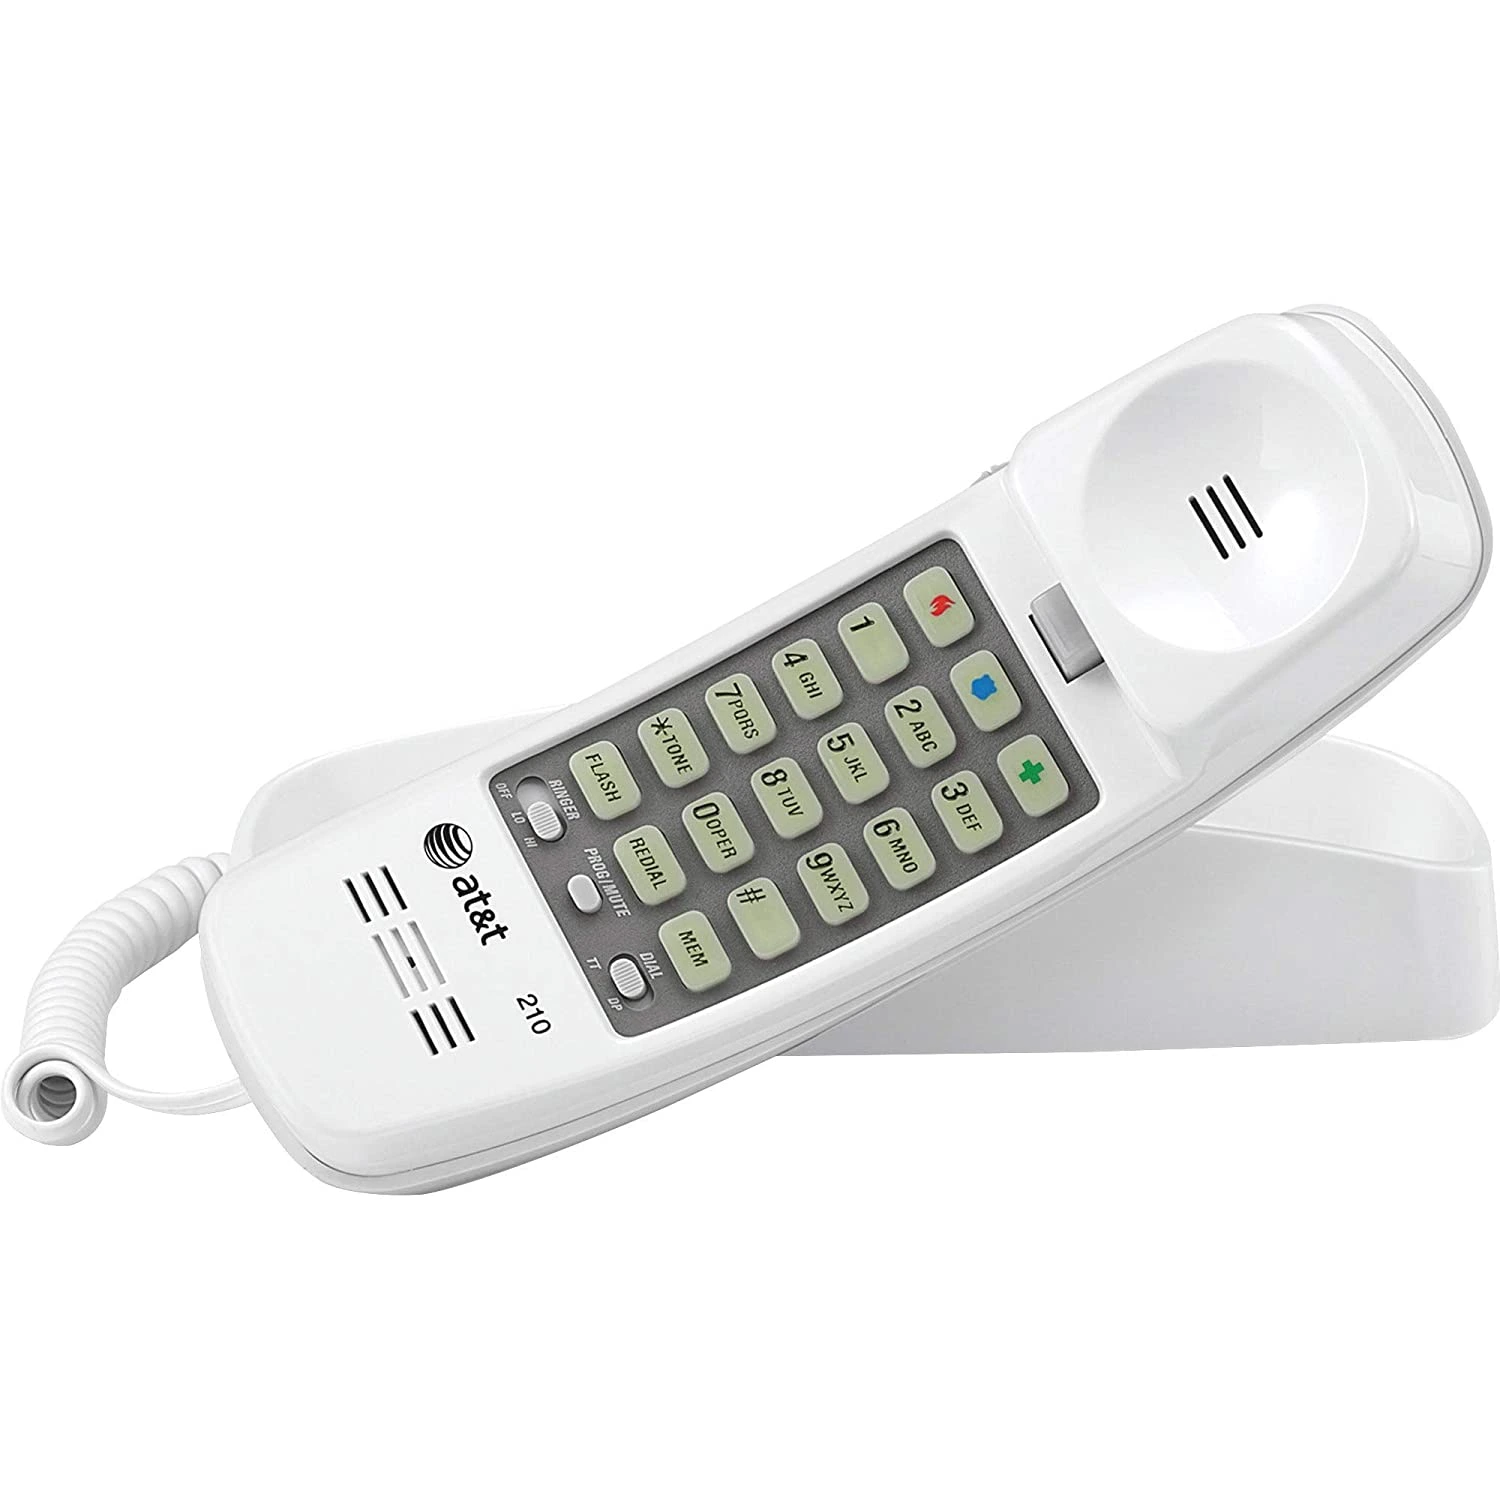 AT&T 210 Corded Trimline Phone with Speed Dial and Memory Buttons